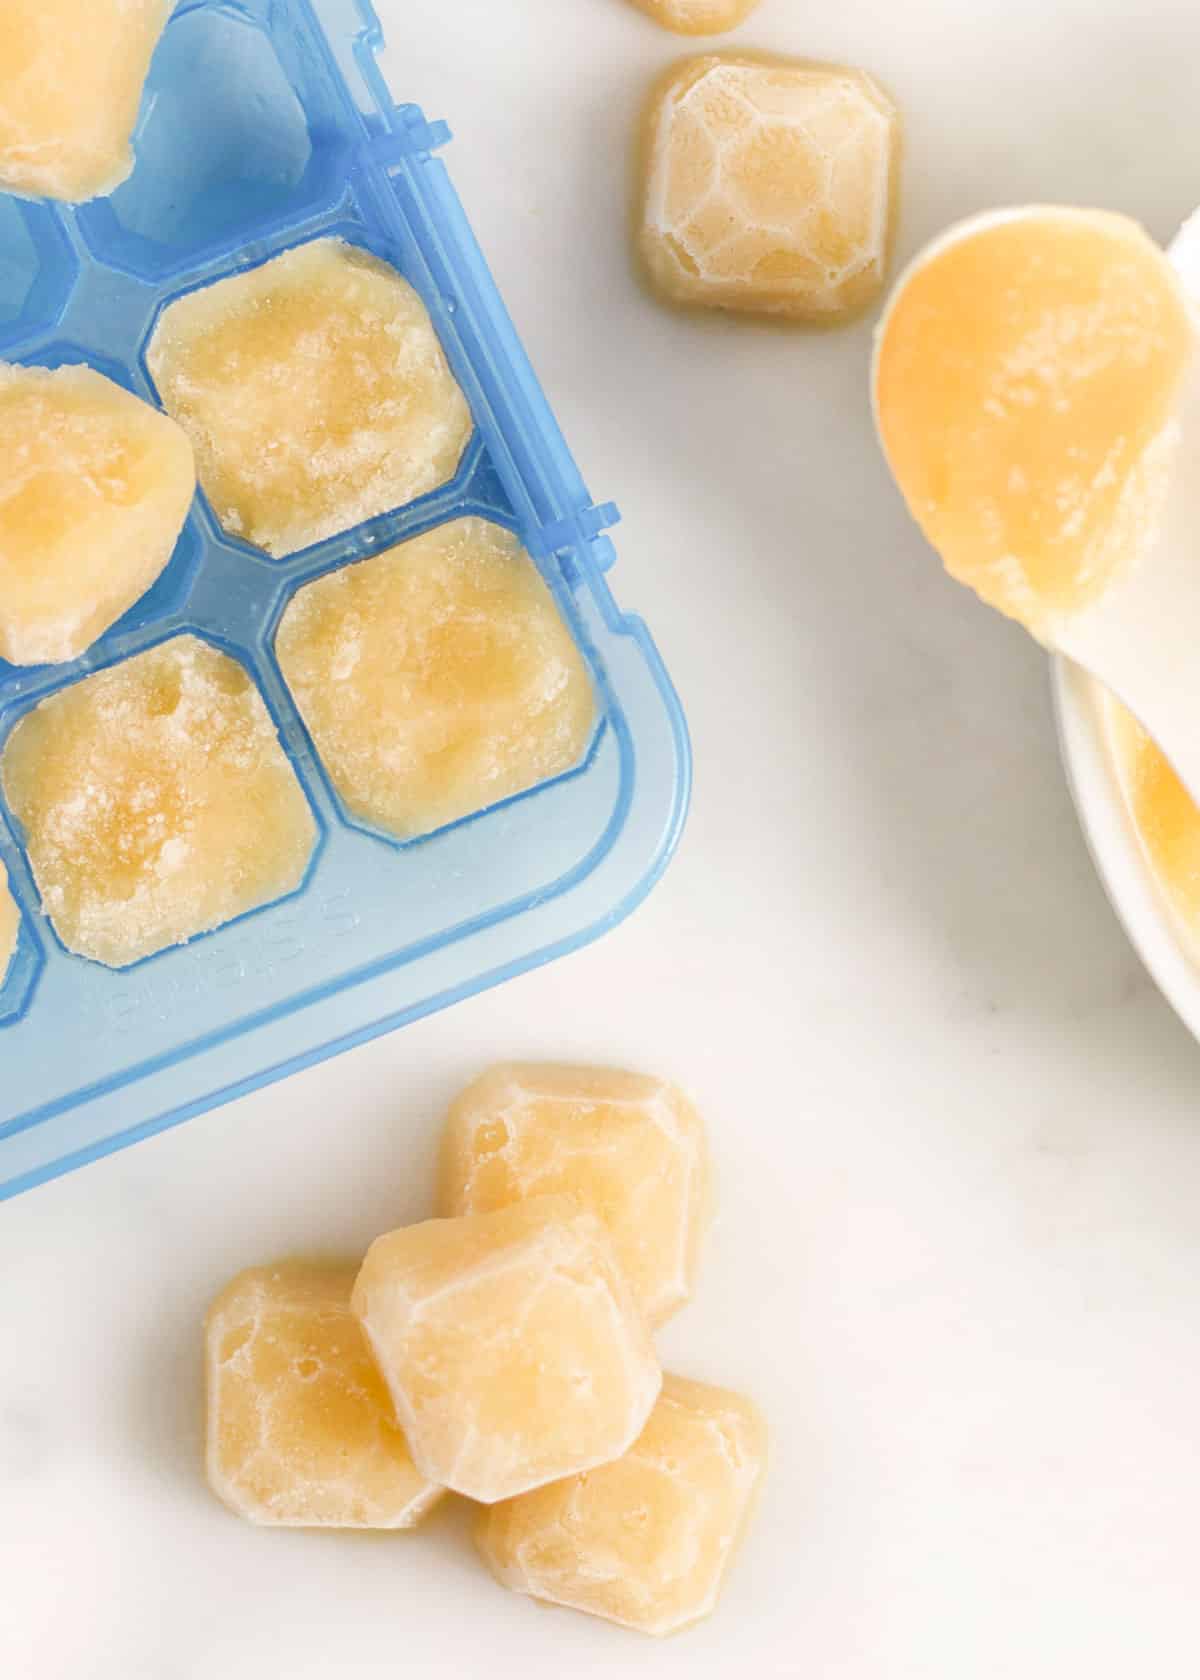 Apple Puree Frozen in Ice Cube Tray with Some Frozen Cubes Removed and Stacked in Pile.